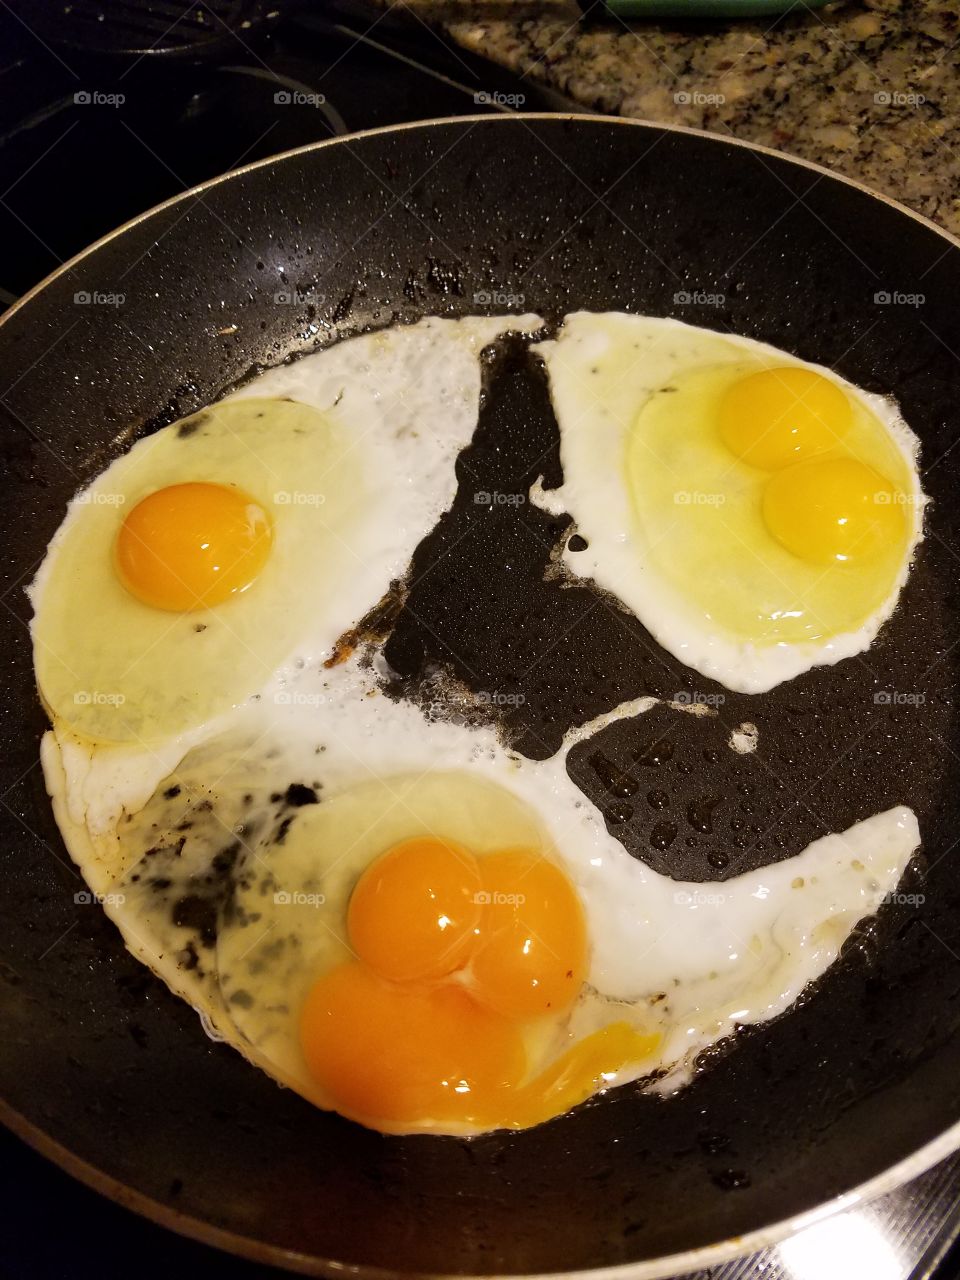 One, Two and Three yolks yummy